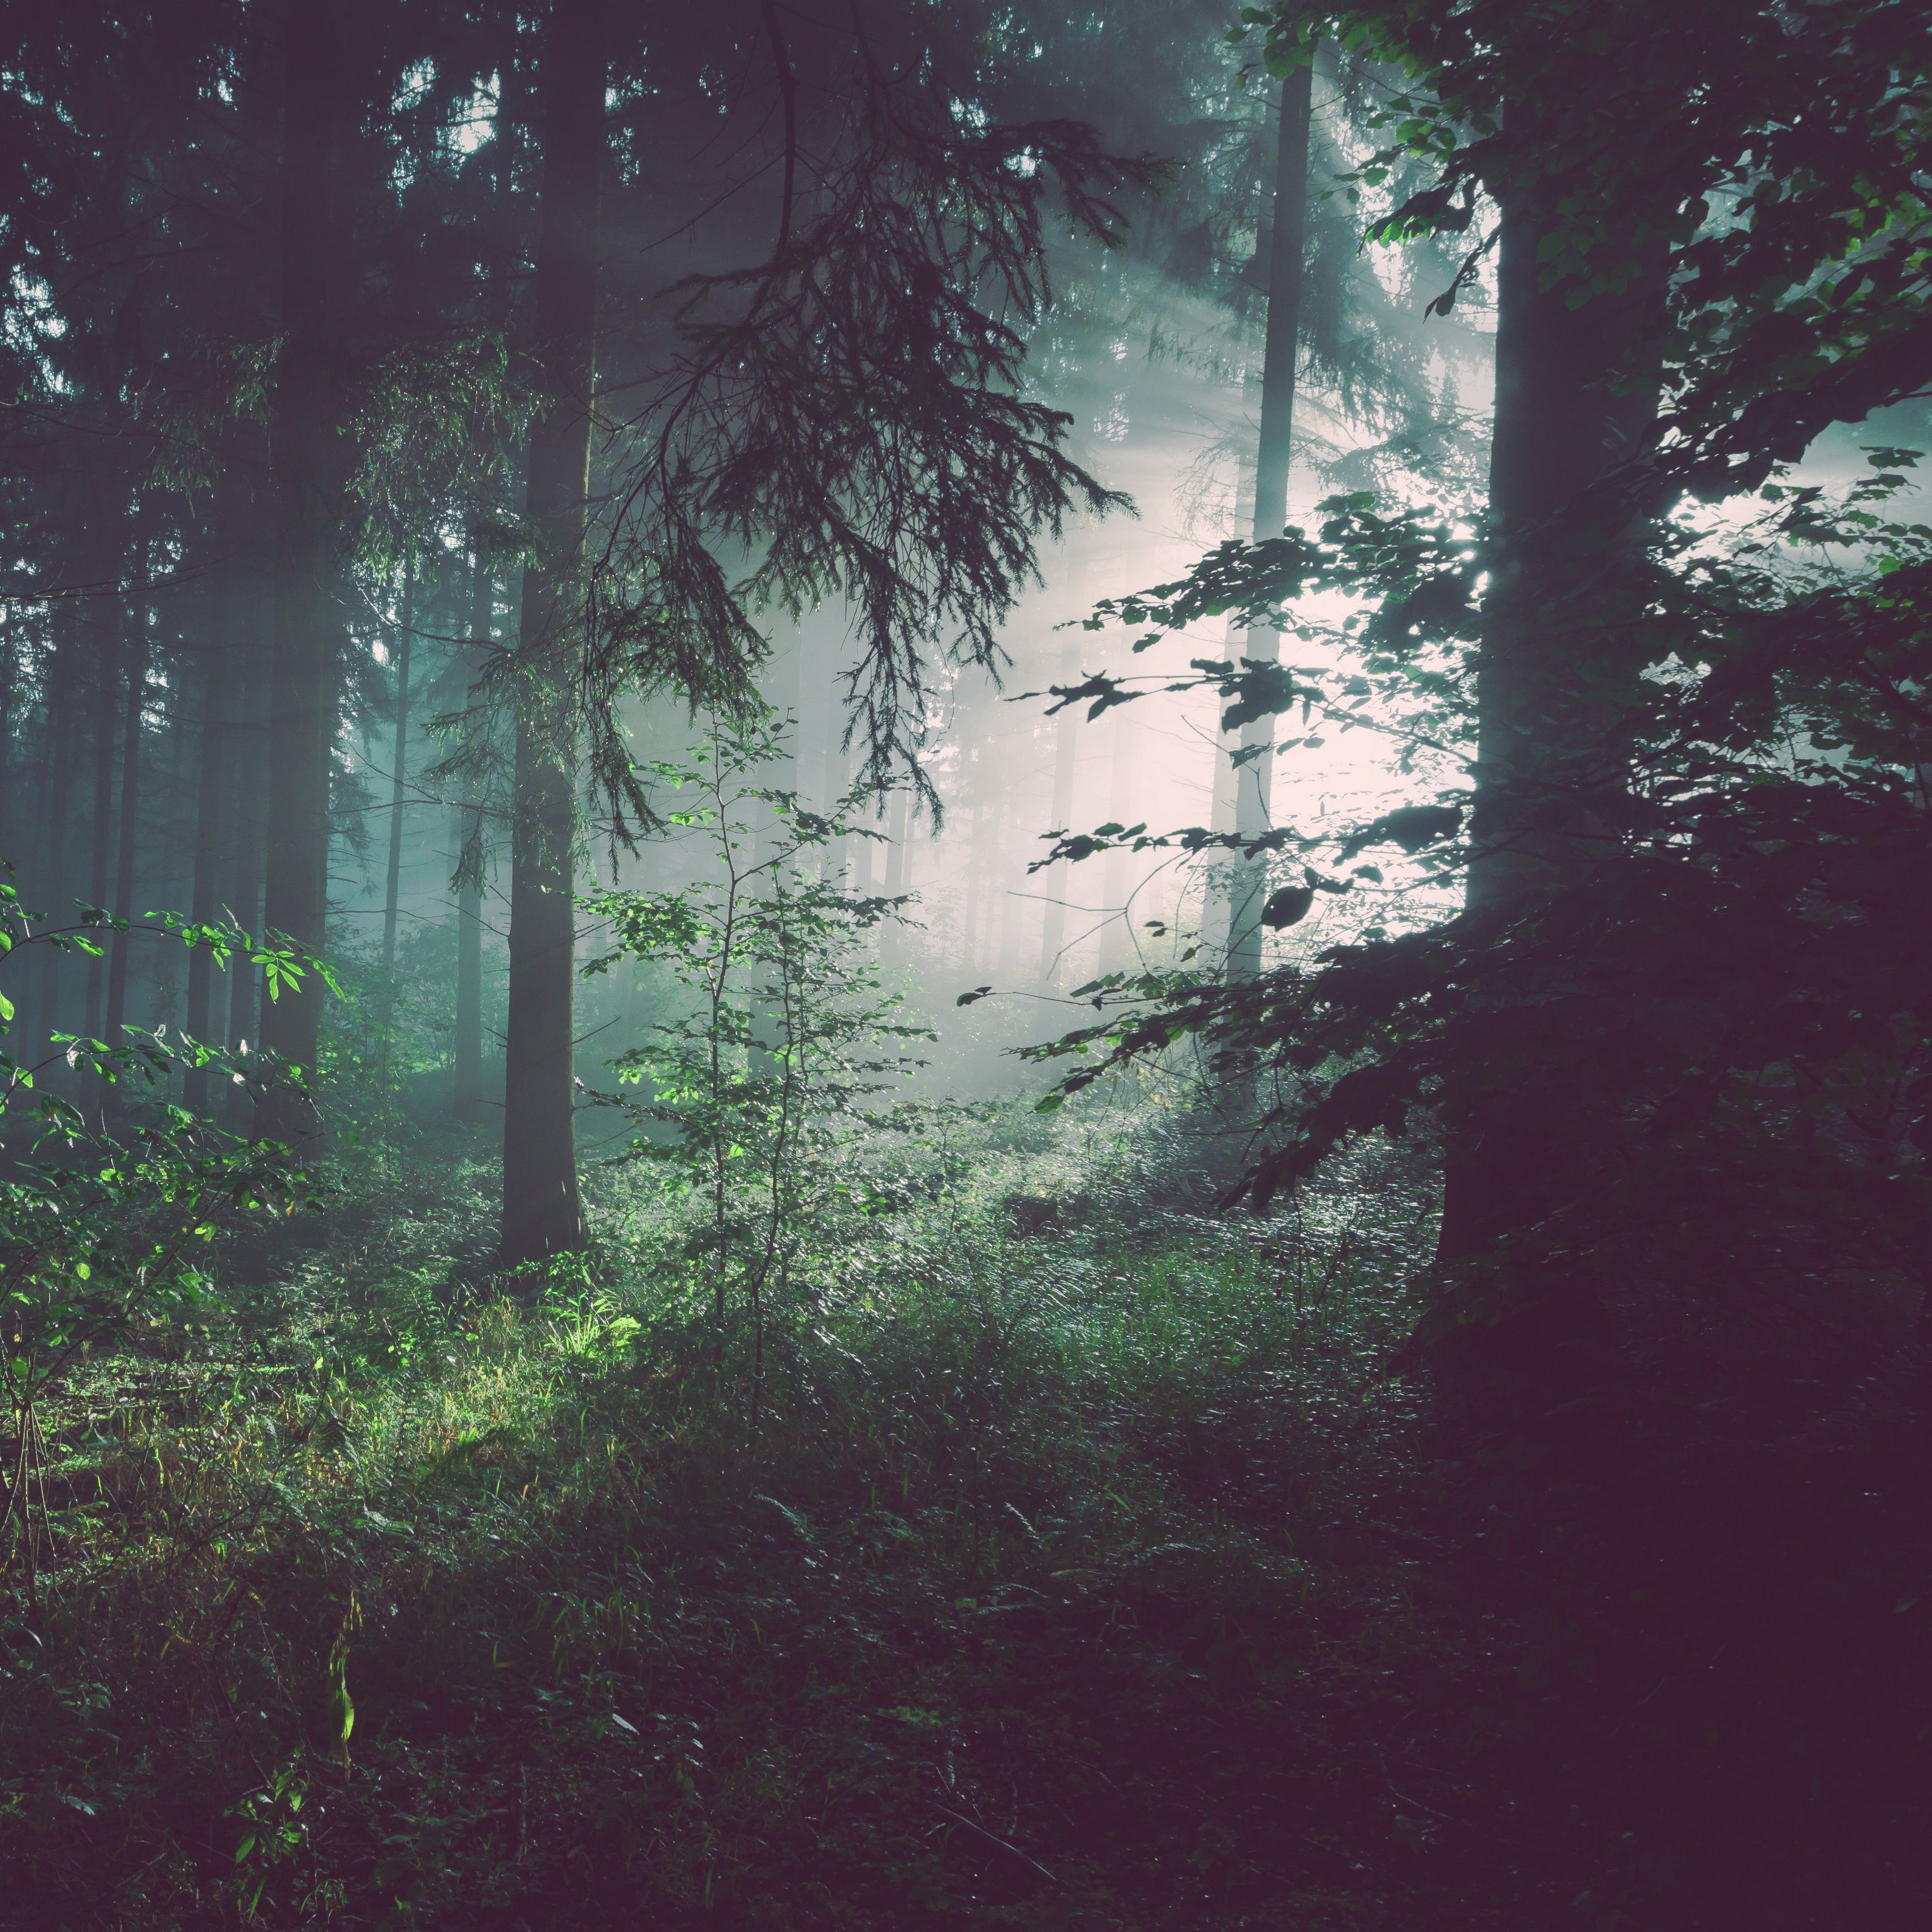 Download wallpaper 3415x3415 forest, trees, fog ipad pro 12.9 retina for parallax HD background